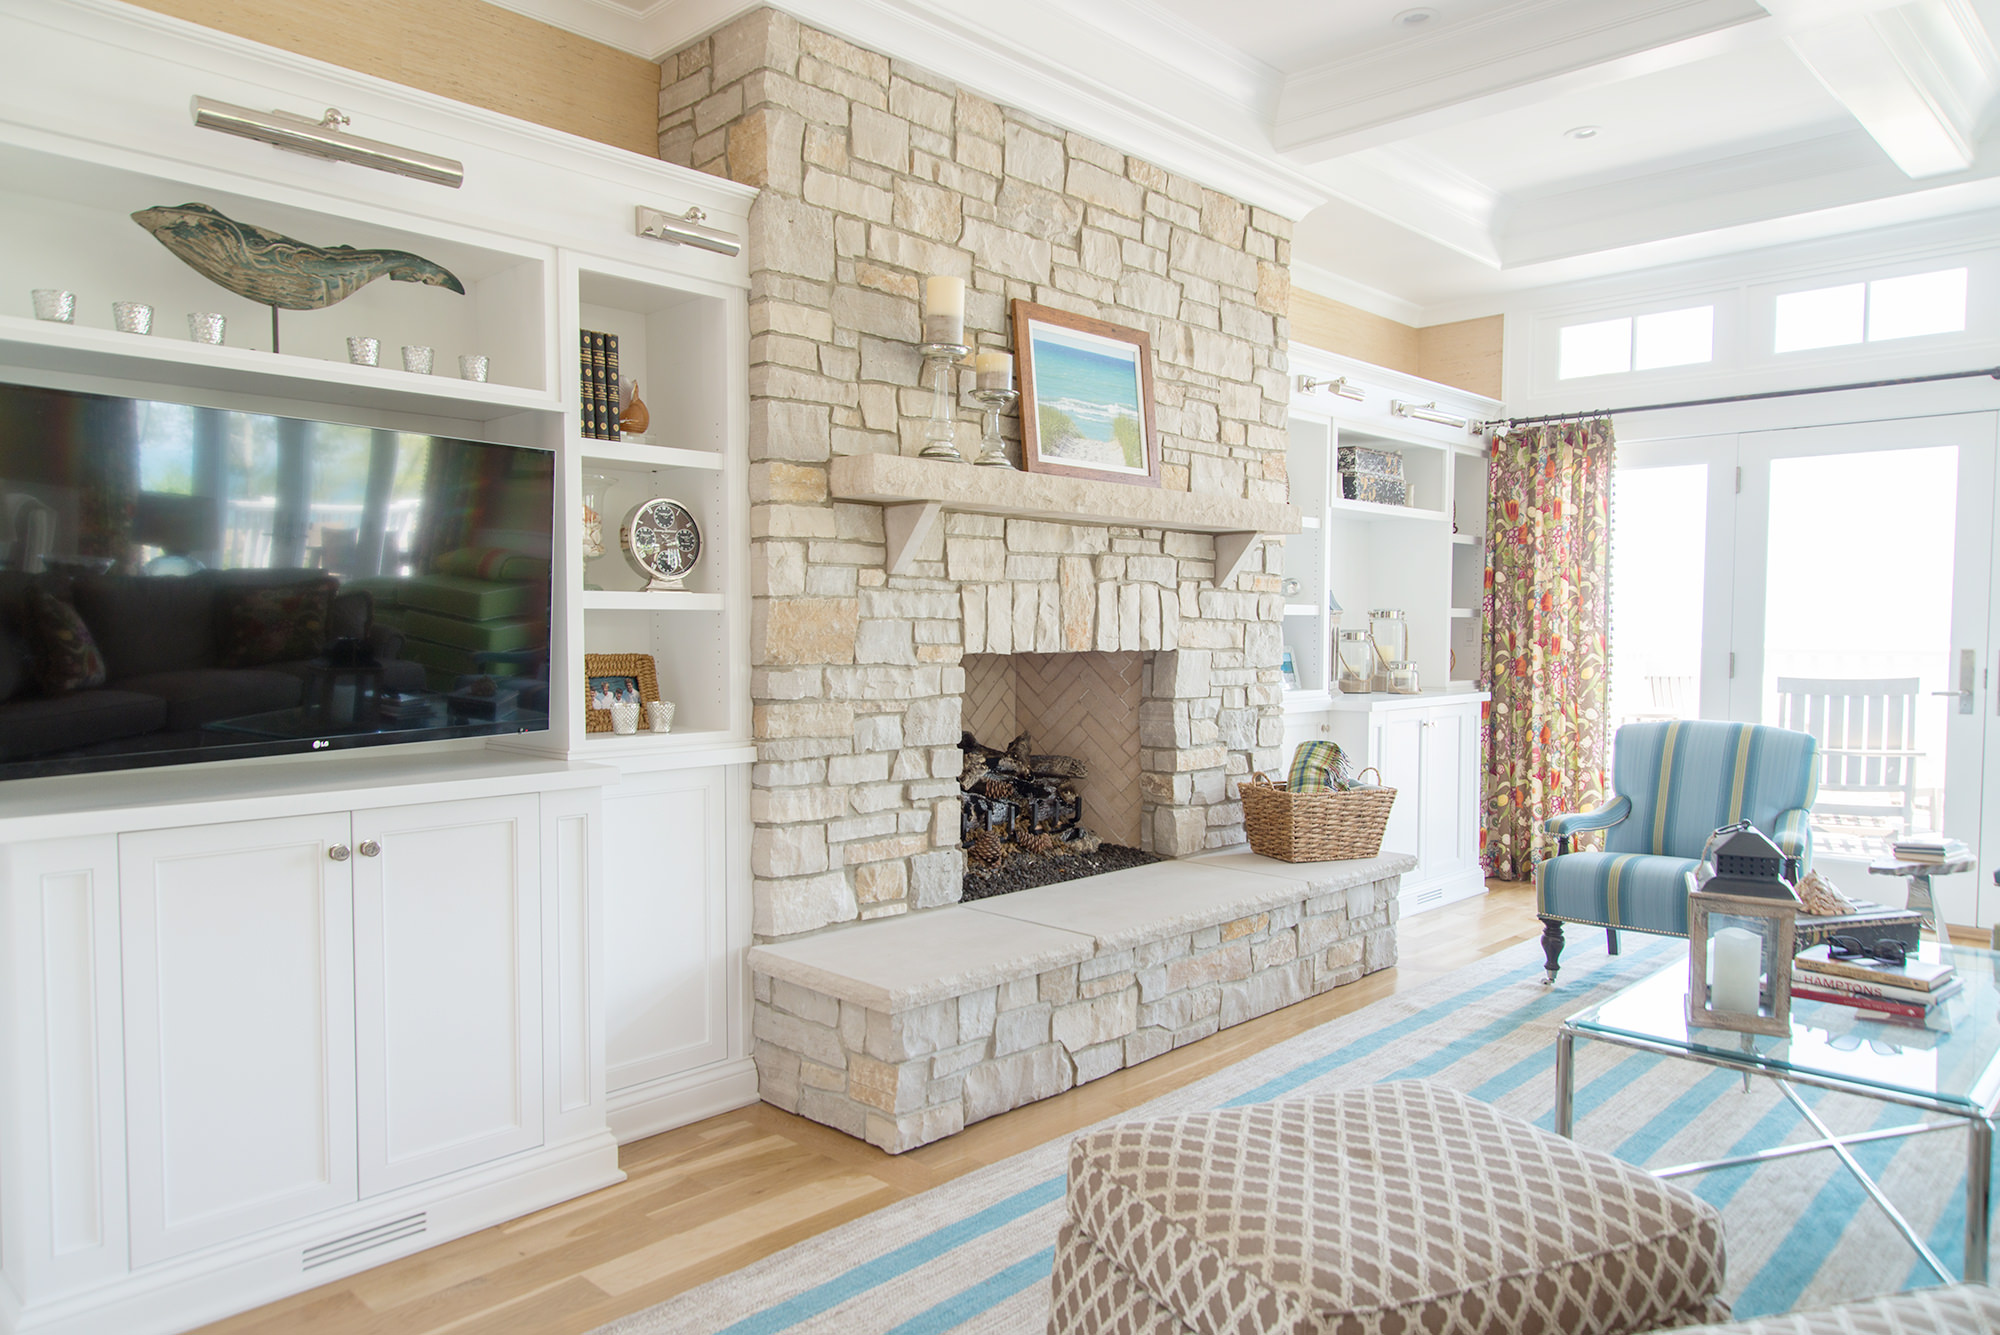 Custom fireplace and entertainment built in's can be designed for your beach home or remodel.